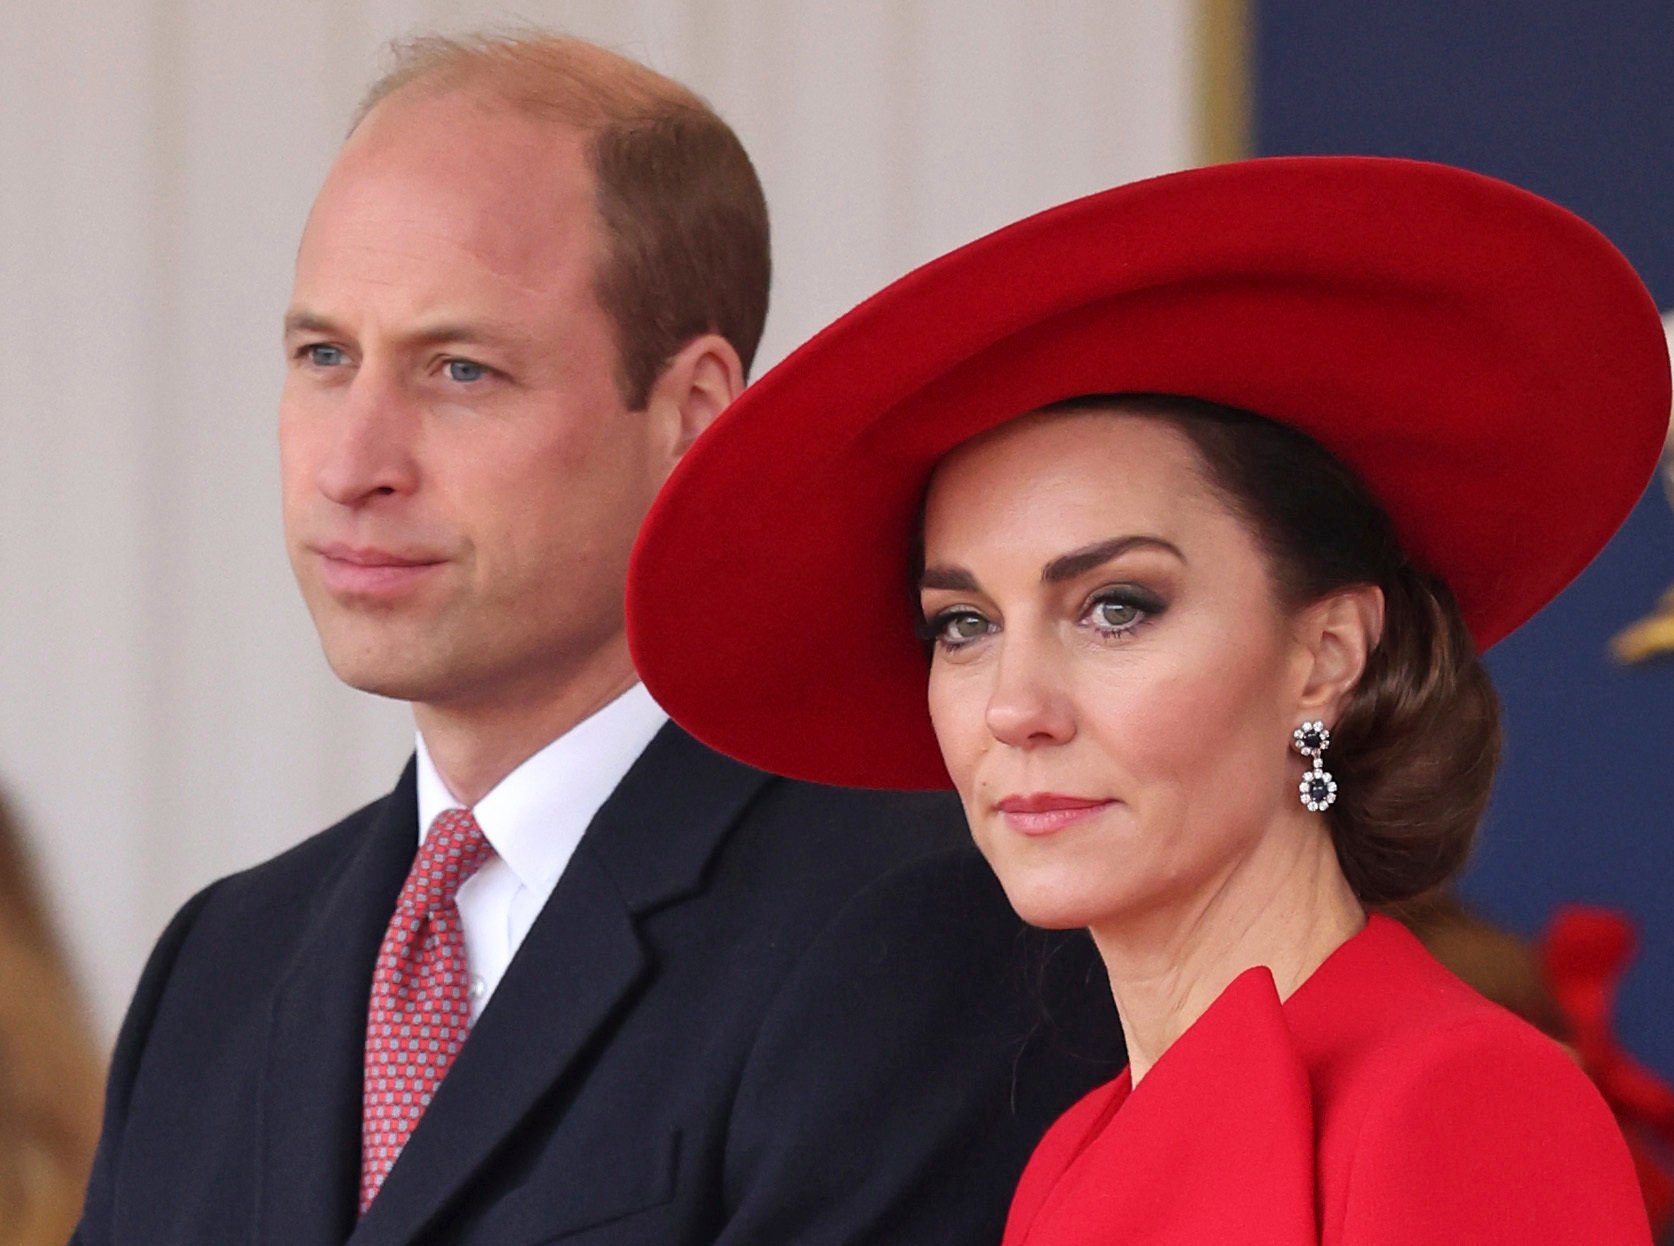 Britain’s Prince William (left) and Kate, Princess of Wales, attend a ceremony in London in November. Photo: AP